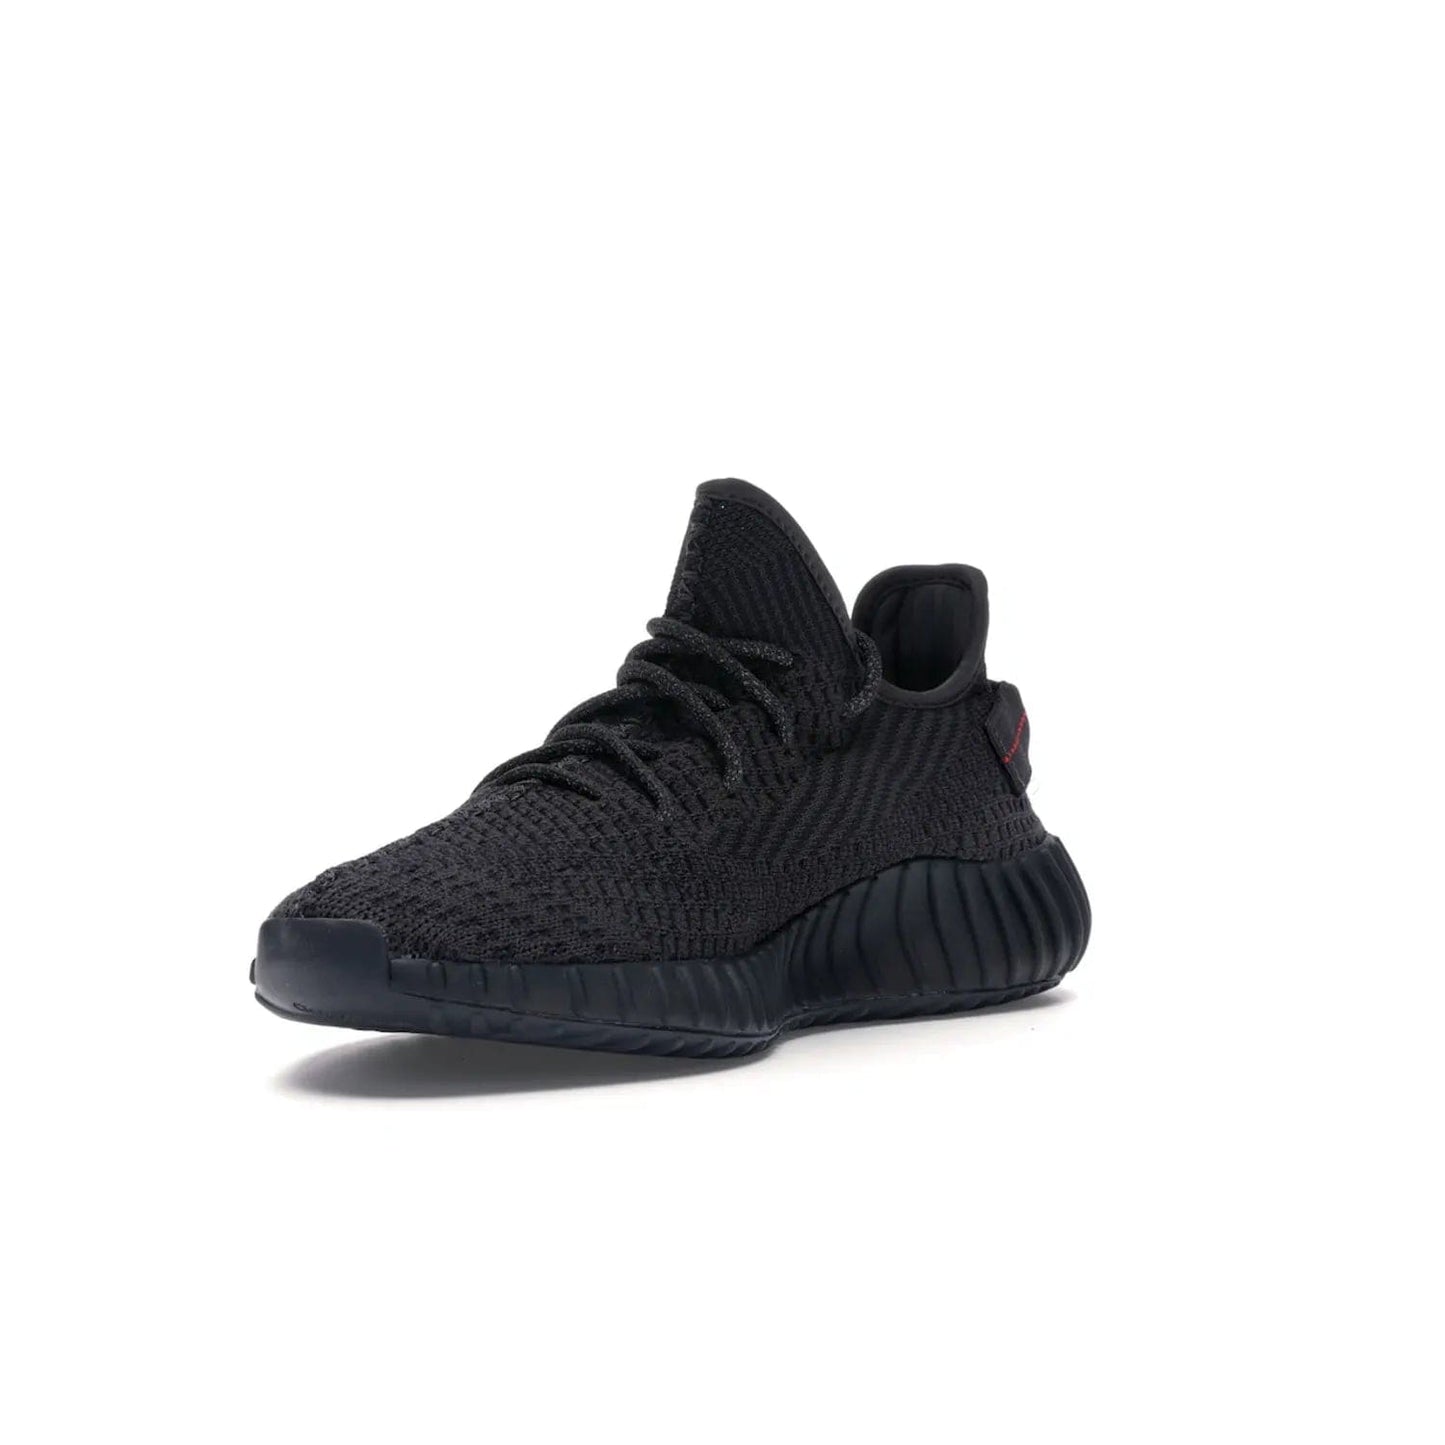 adidas Yeezy Boost 350 V2 Black (Non-Reflective) - Image 14 - Only at www.BallersClubKickz.com - A timeless, sleek silhouette crafted from quality materials. The adidas Yeezy Boost 350 V2 Black (Non-Reflective) brings style and sophistication. Get yours now!